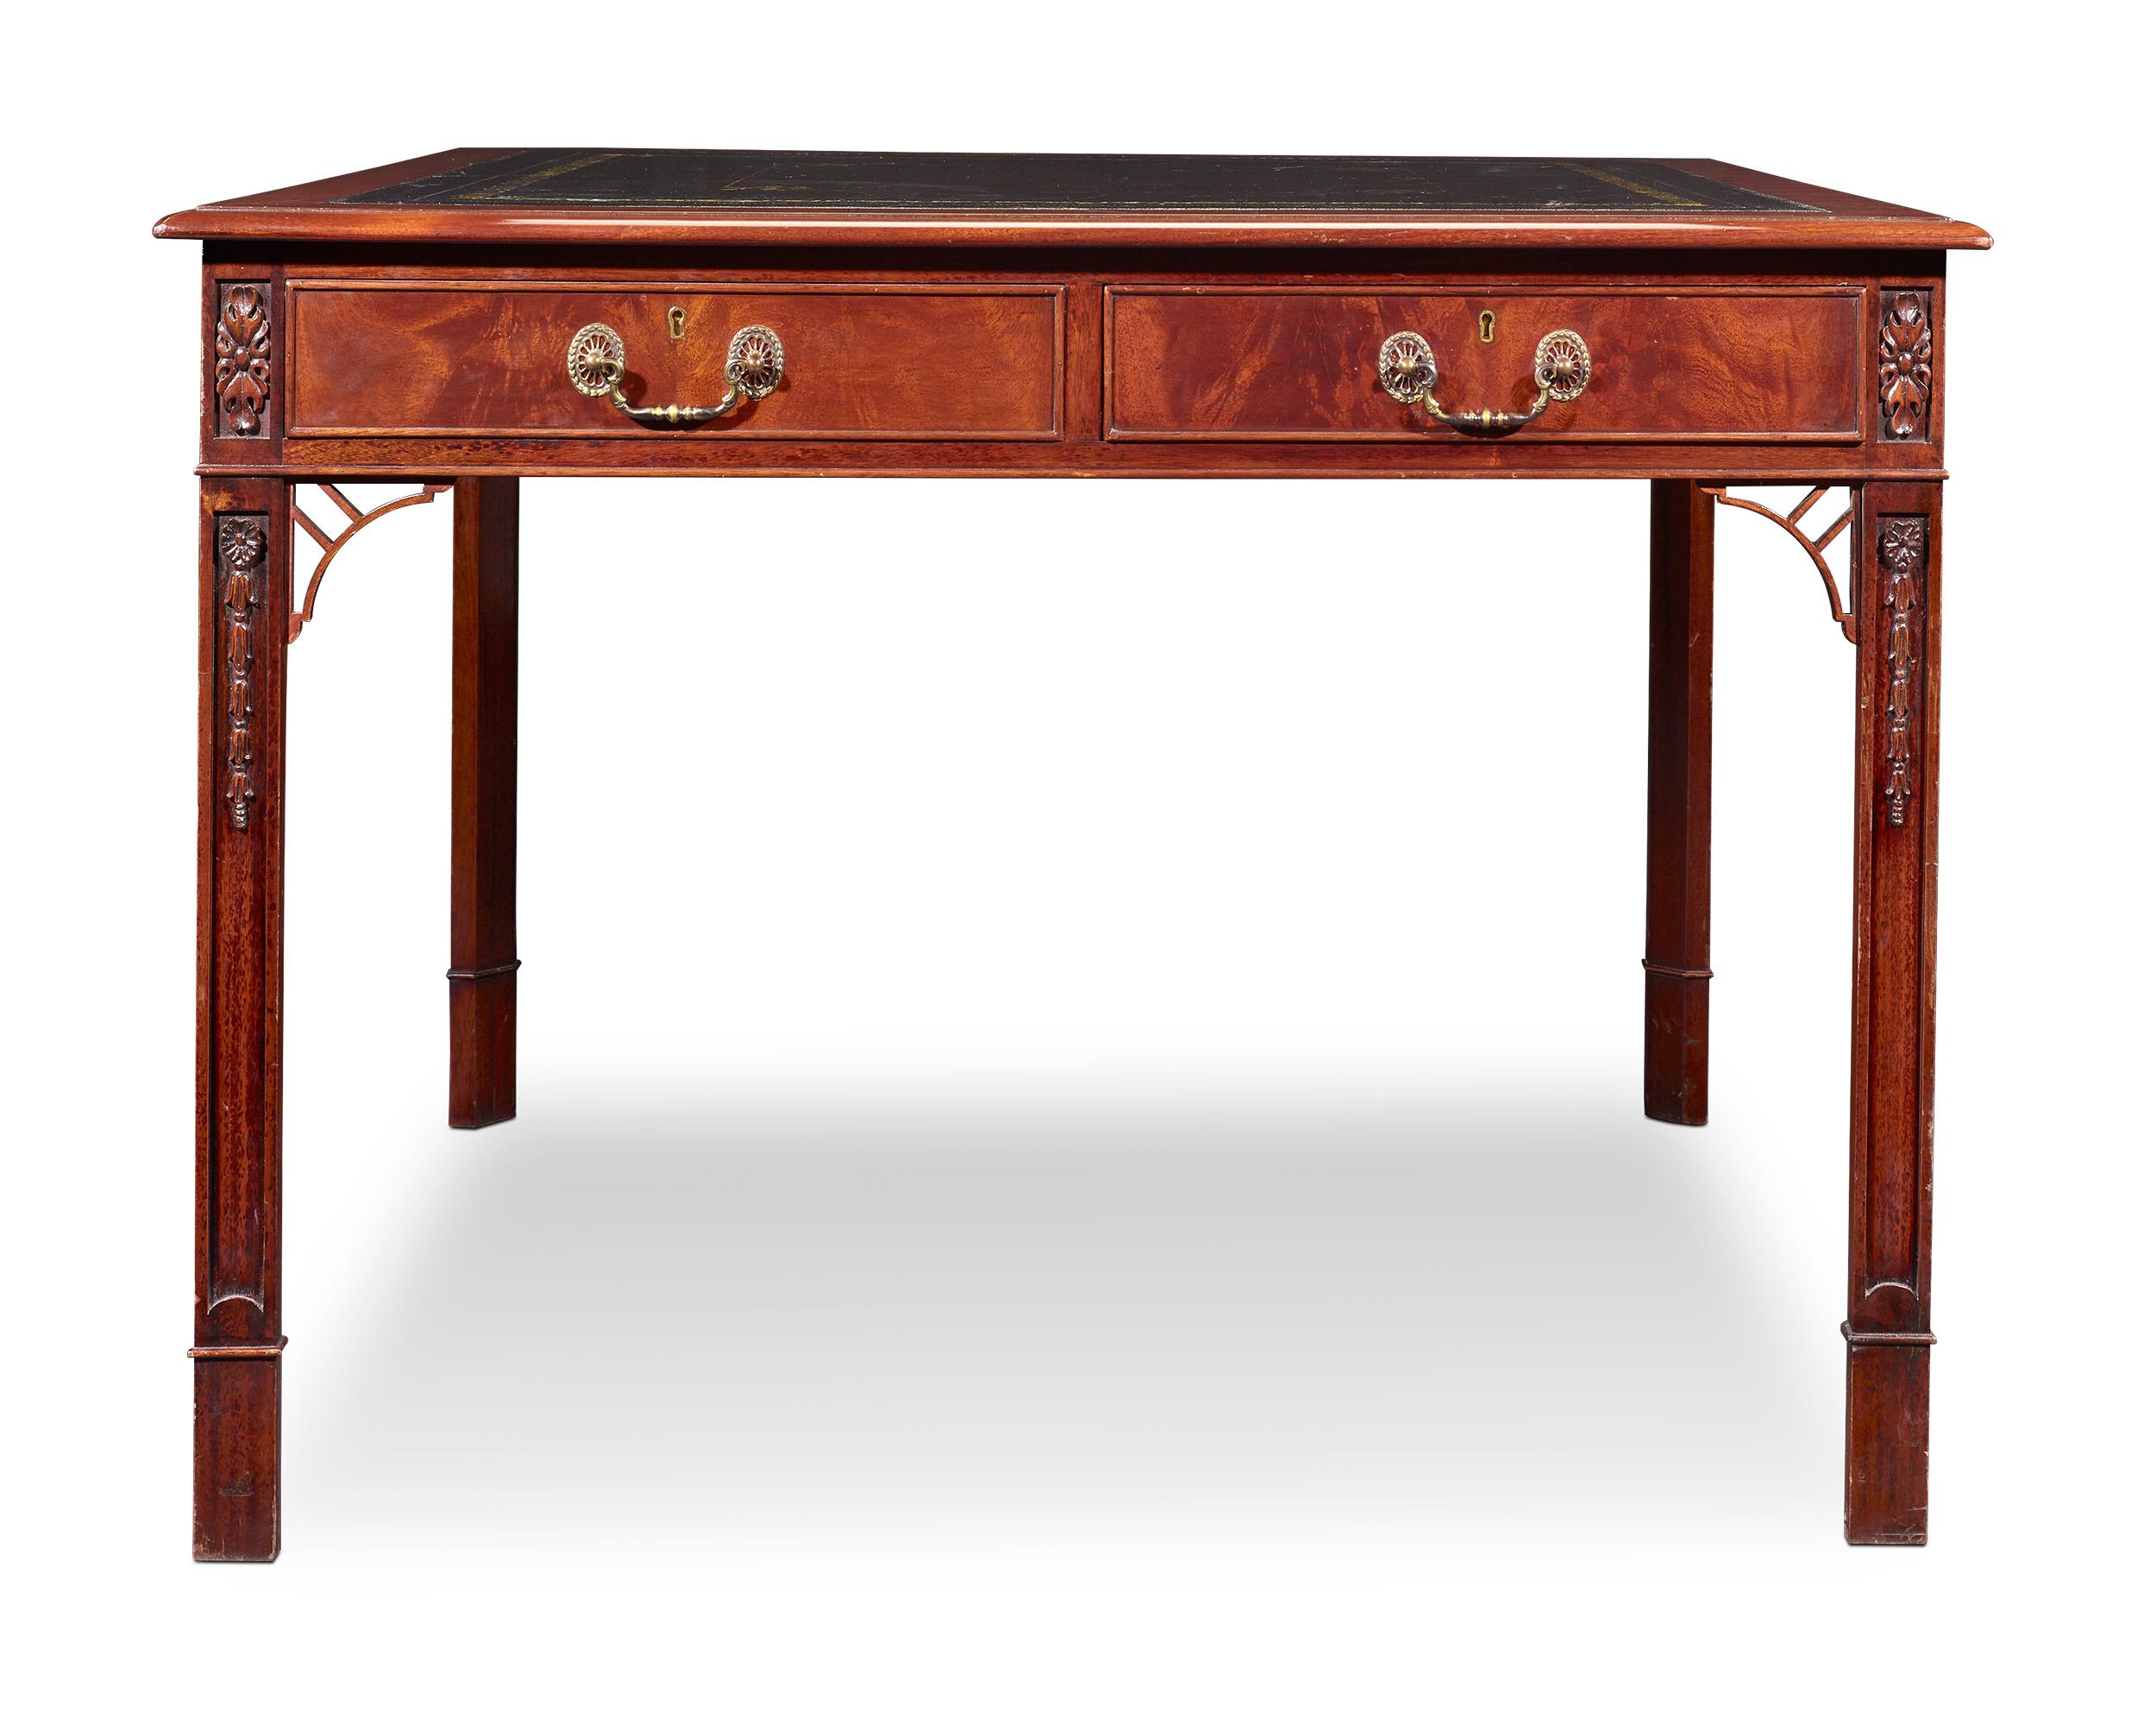 English Regency-Style Mahogany Library Table For Sale